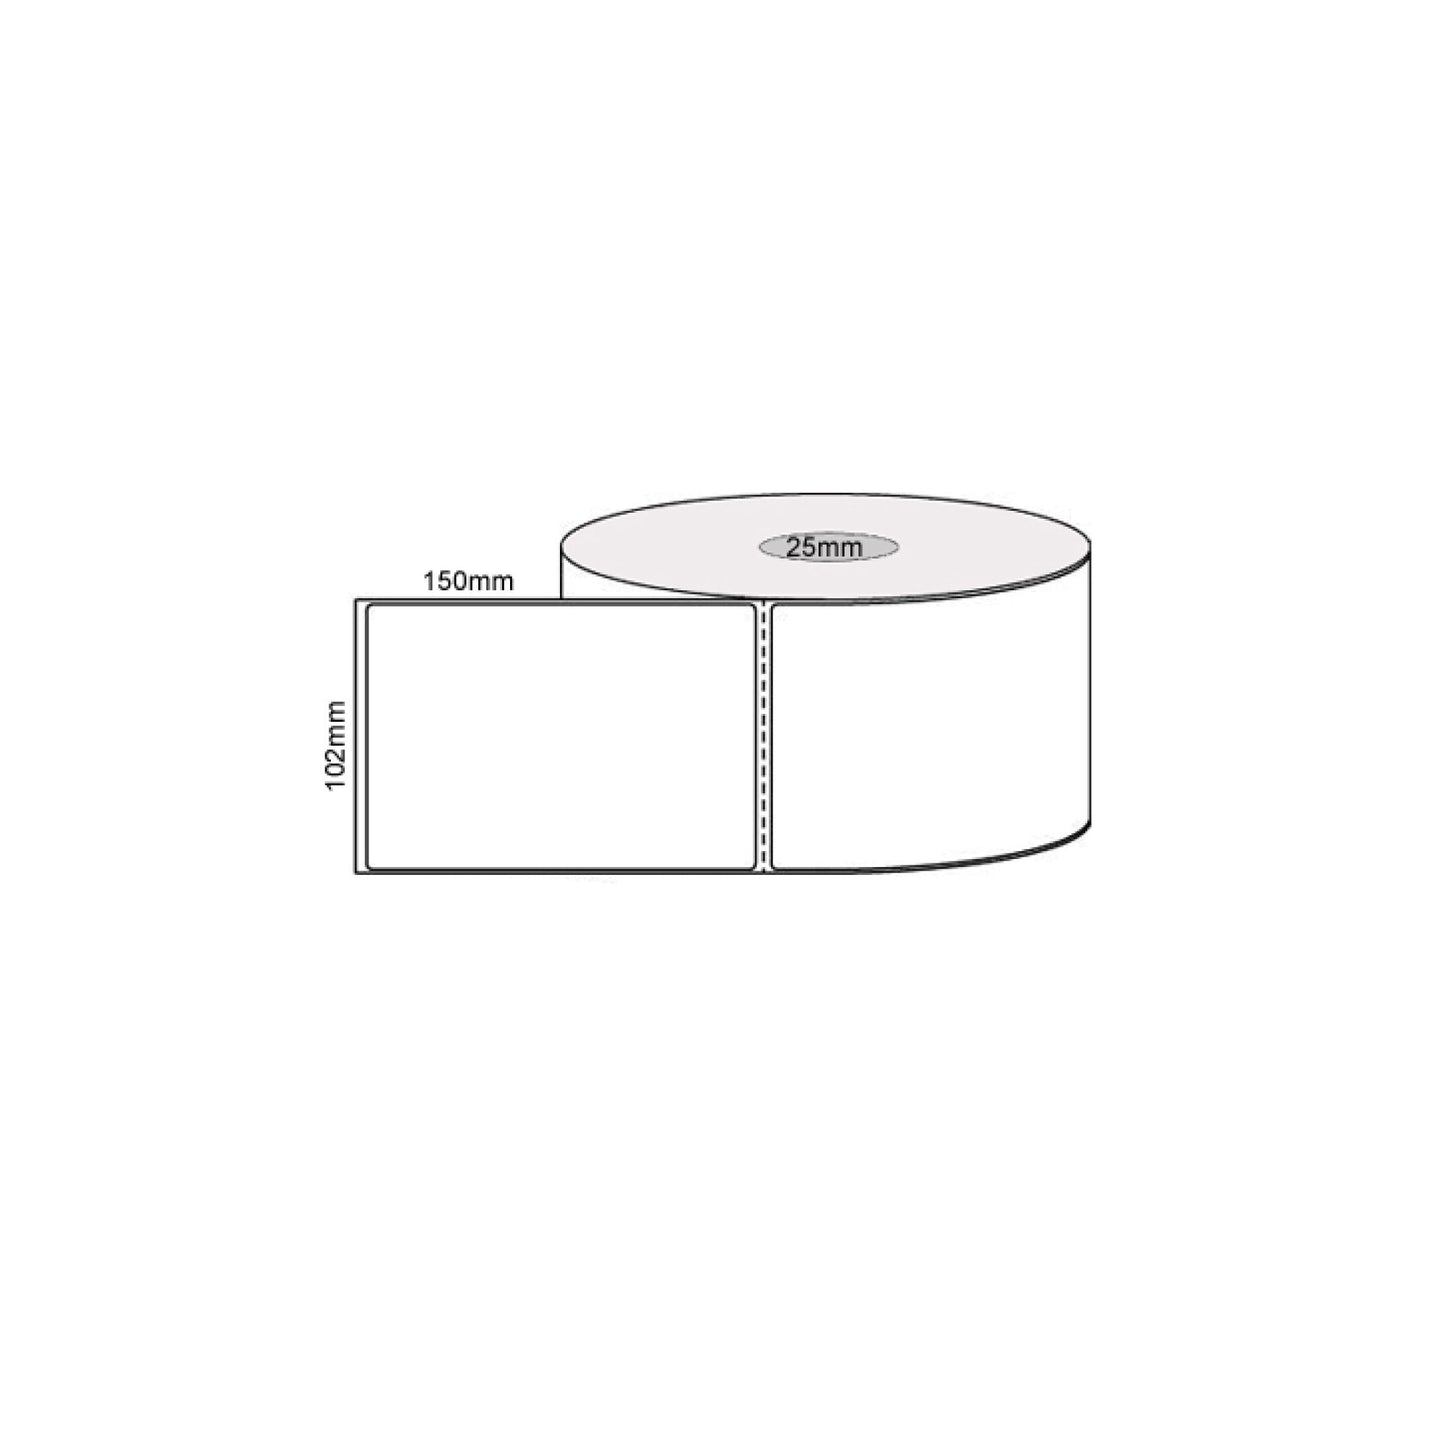 1 Roll x 400 Label Stickers 102x150mm - Direct Thermal White Shipping Labels